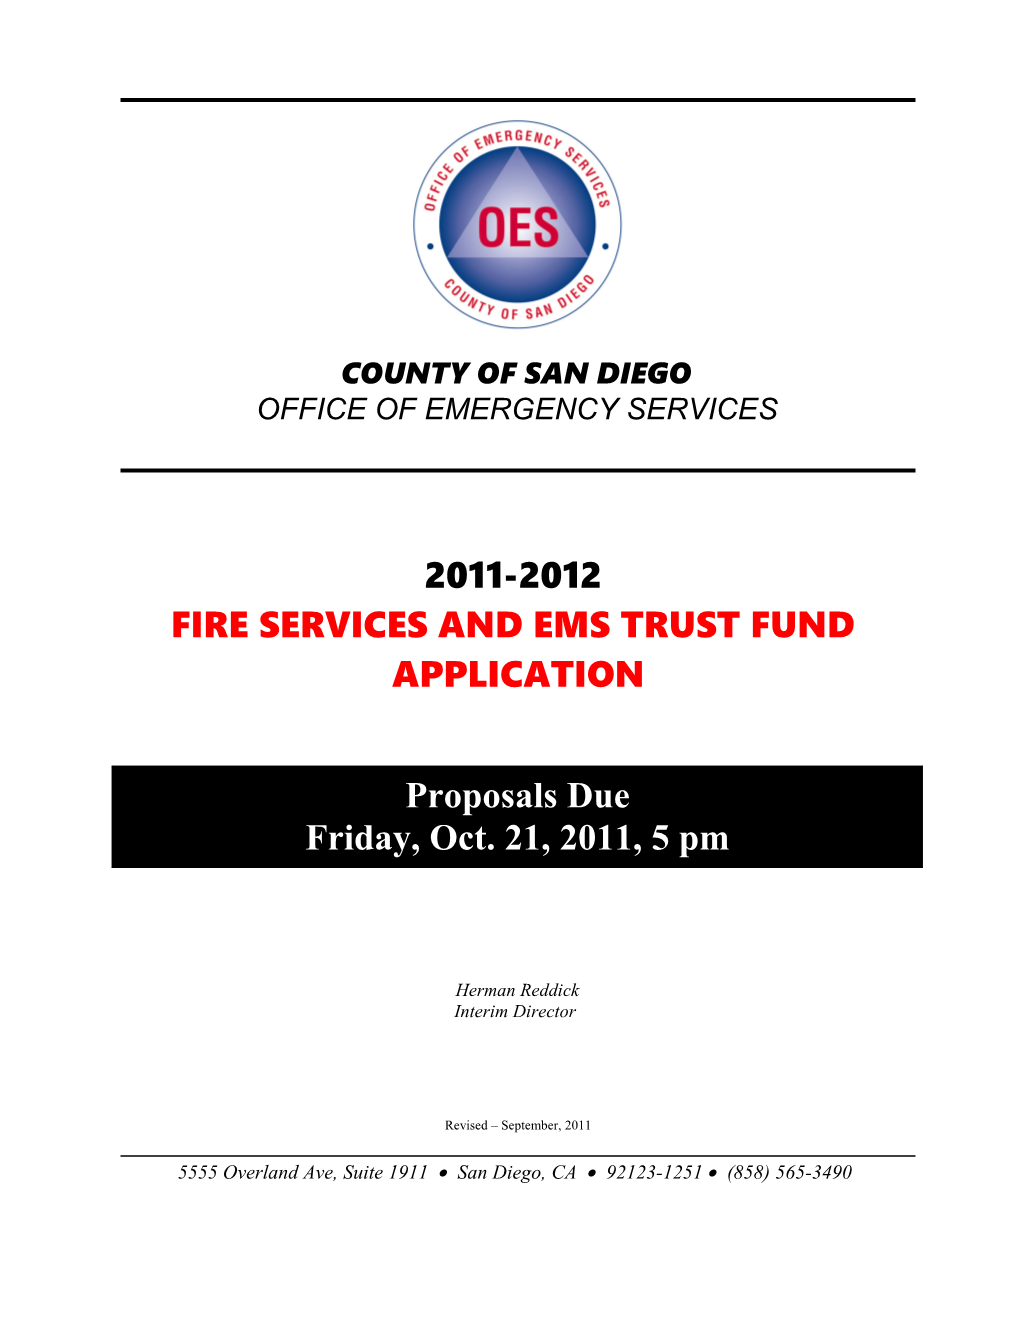 FY 06-07 Fire Protection & EMS Trust Fund Application